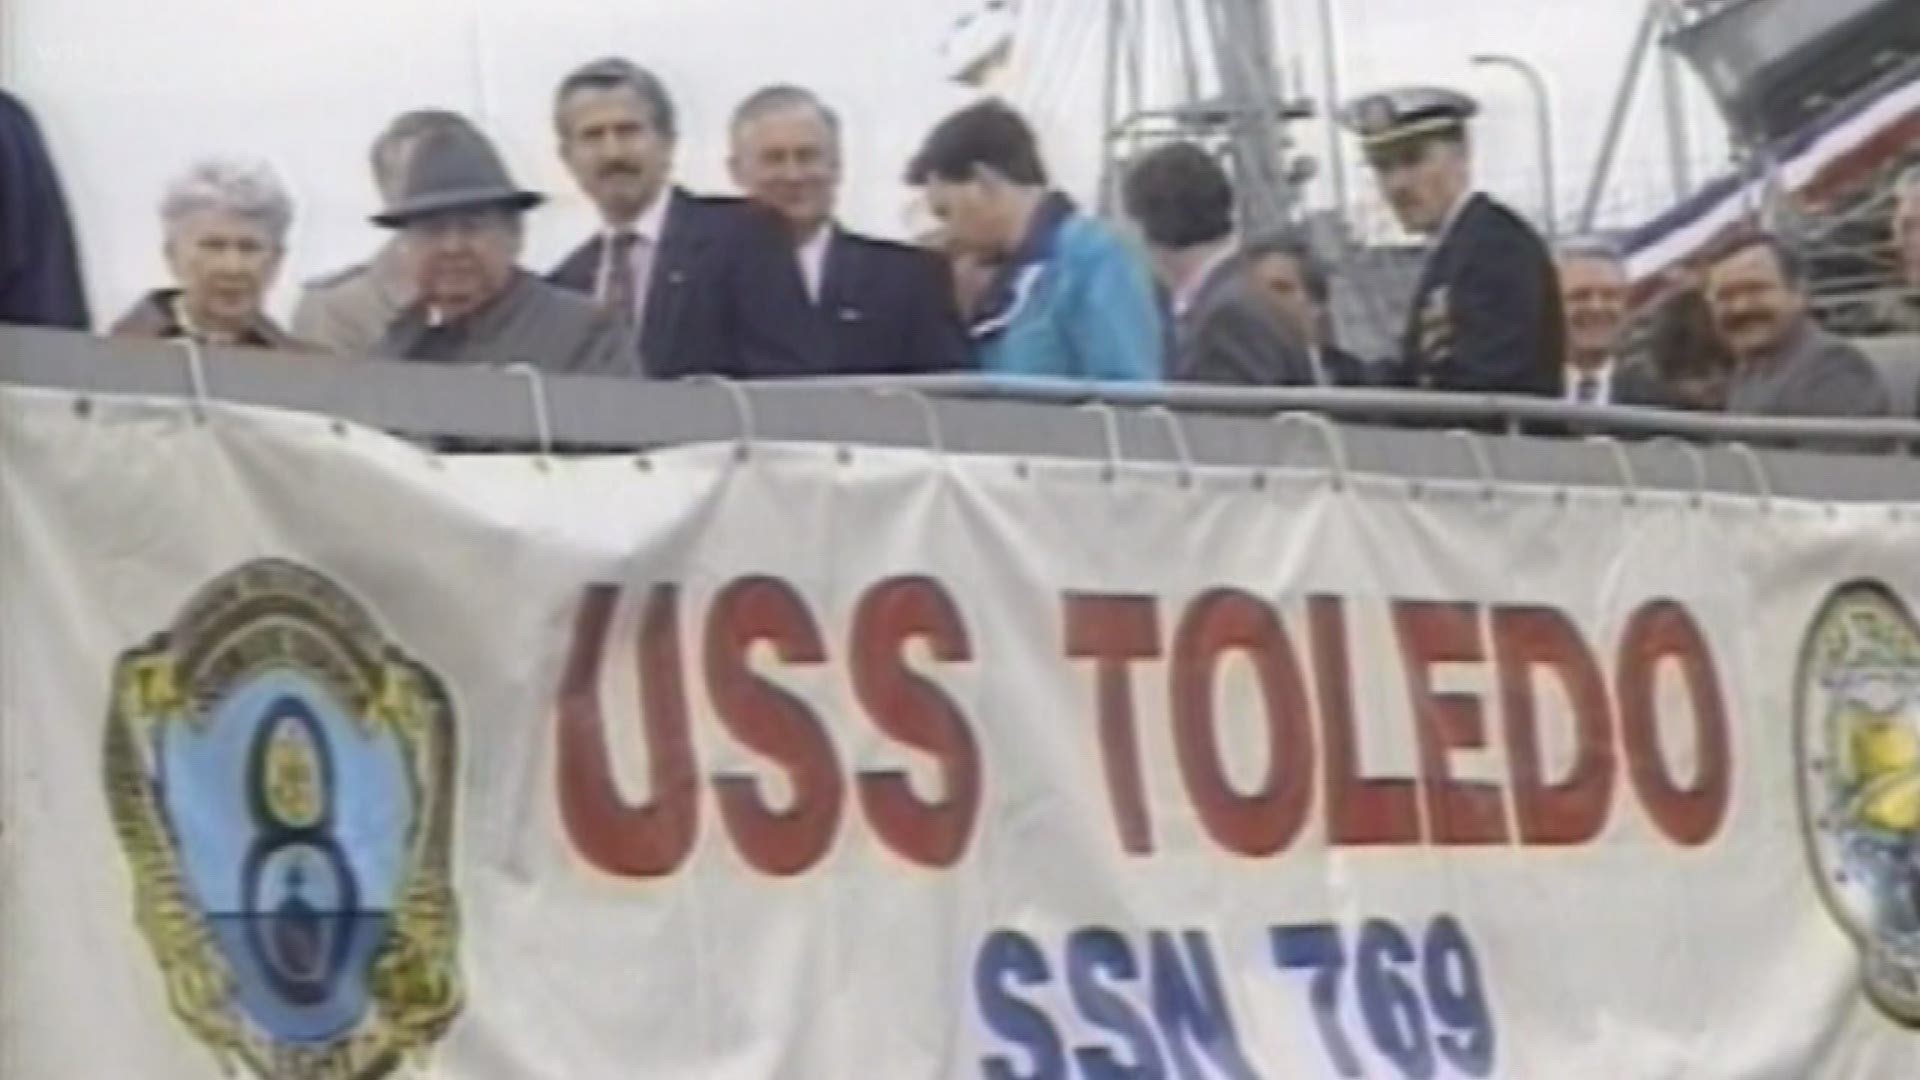 The USS Toledo sub was commissioned 25 years ago this month.